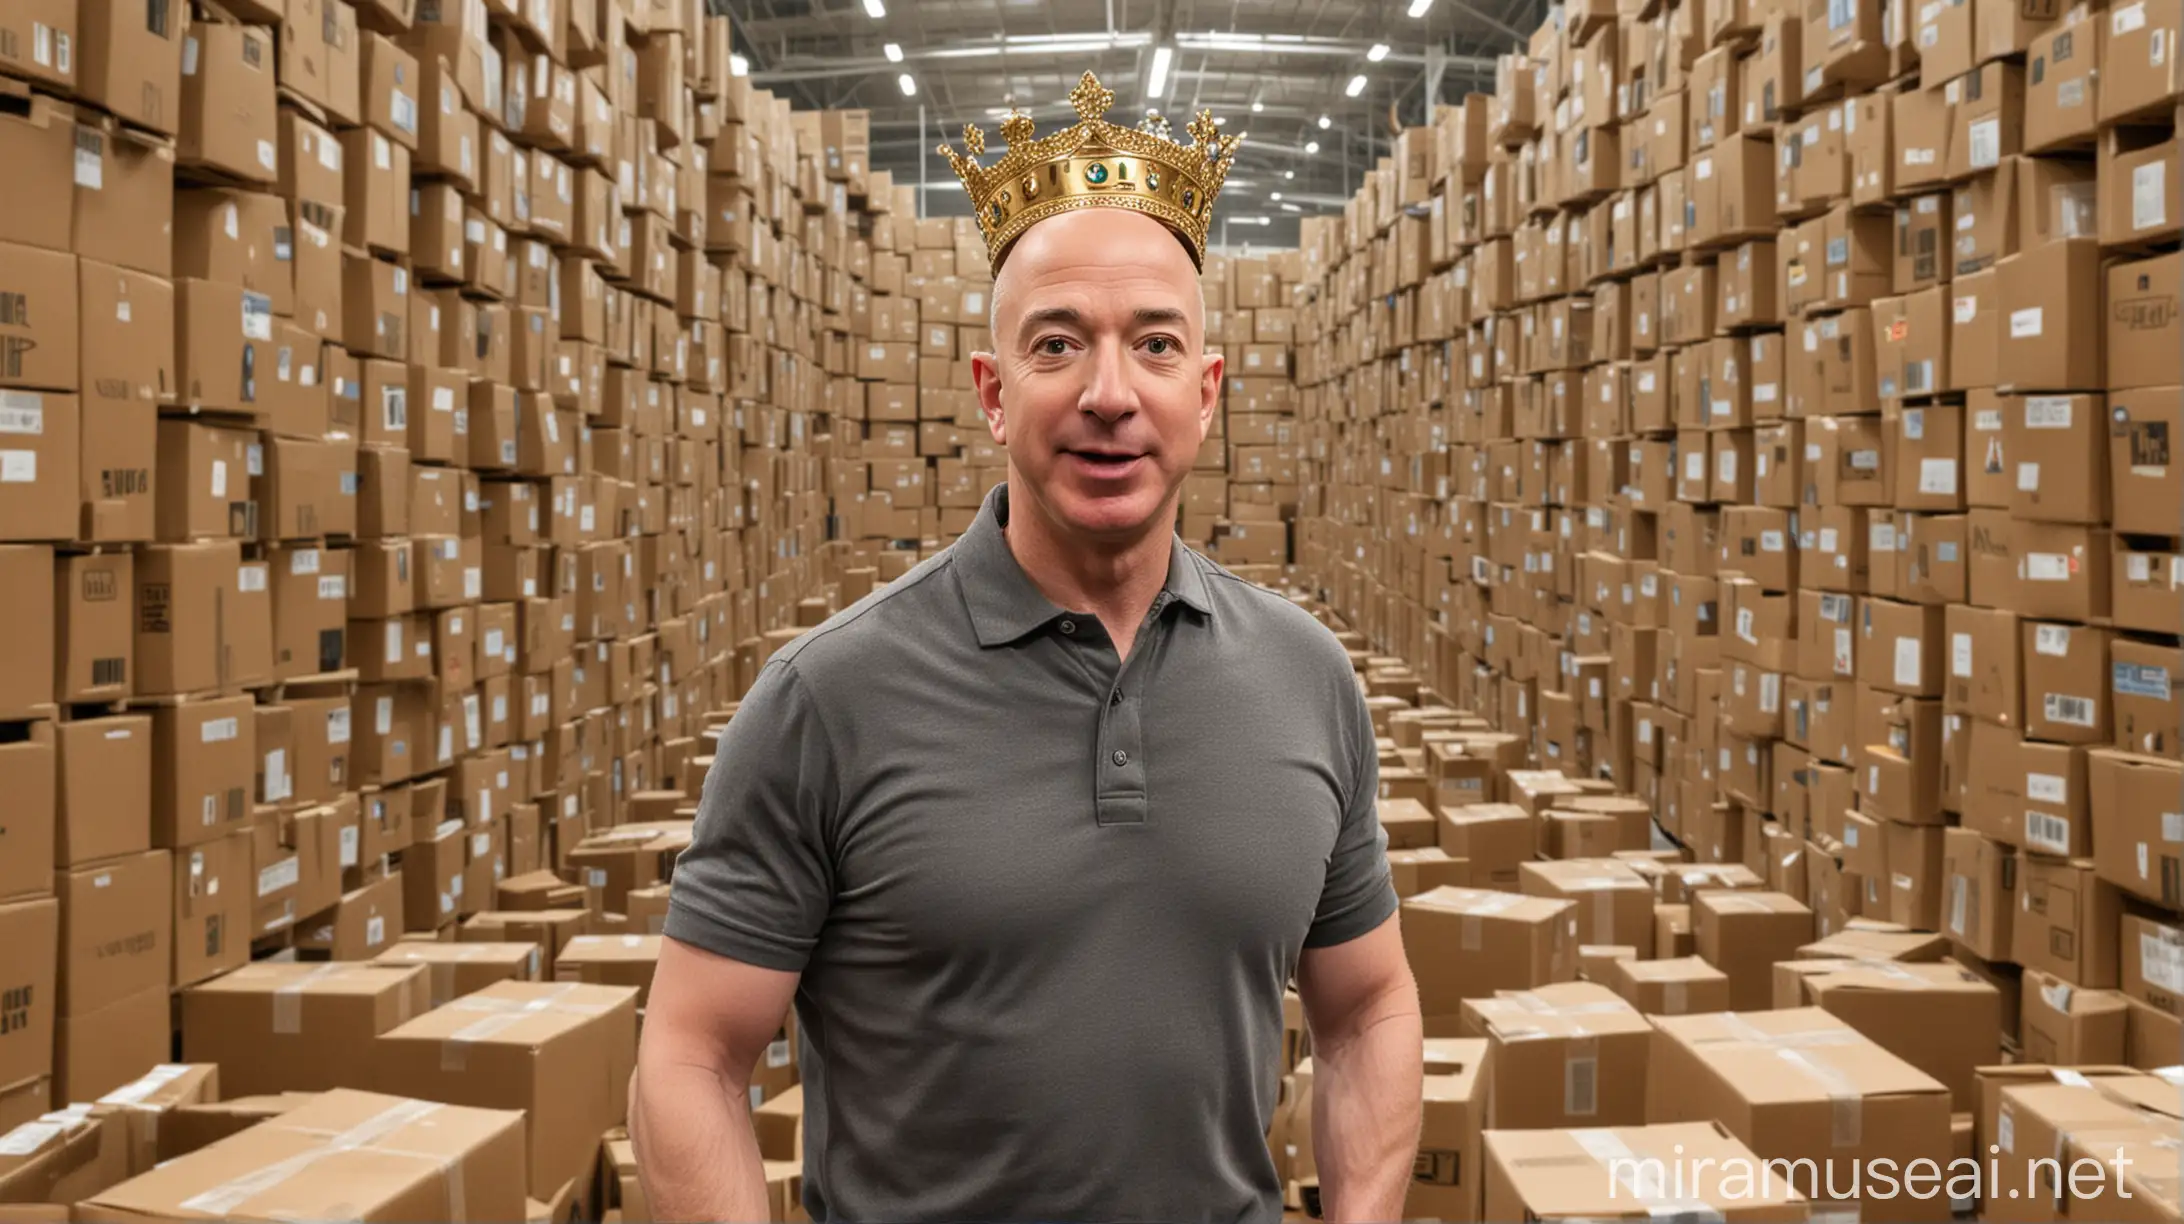 Jeff Bezos Wearing Crown Surrounded by Amazon Boxes